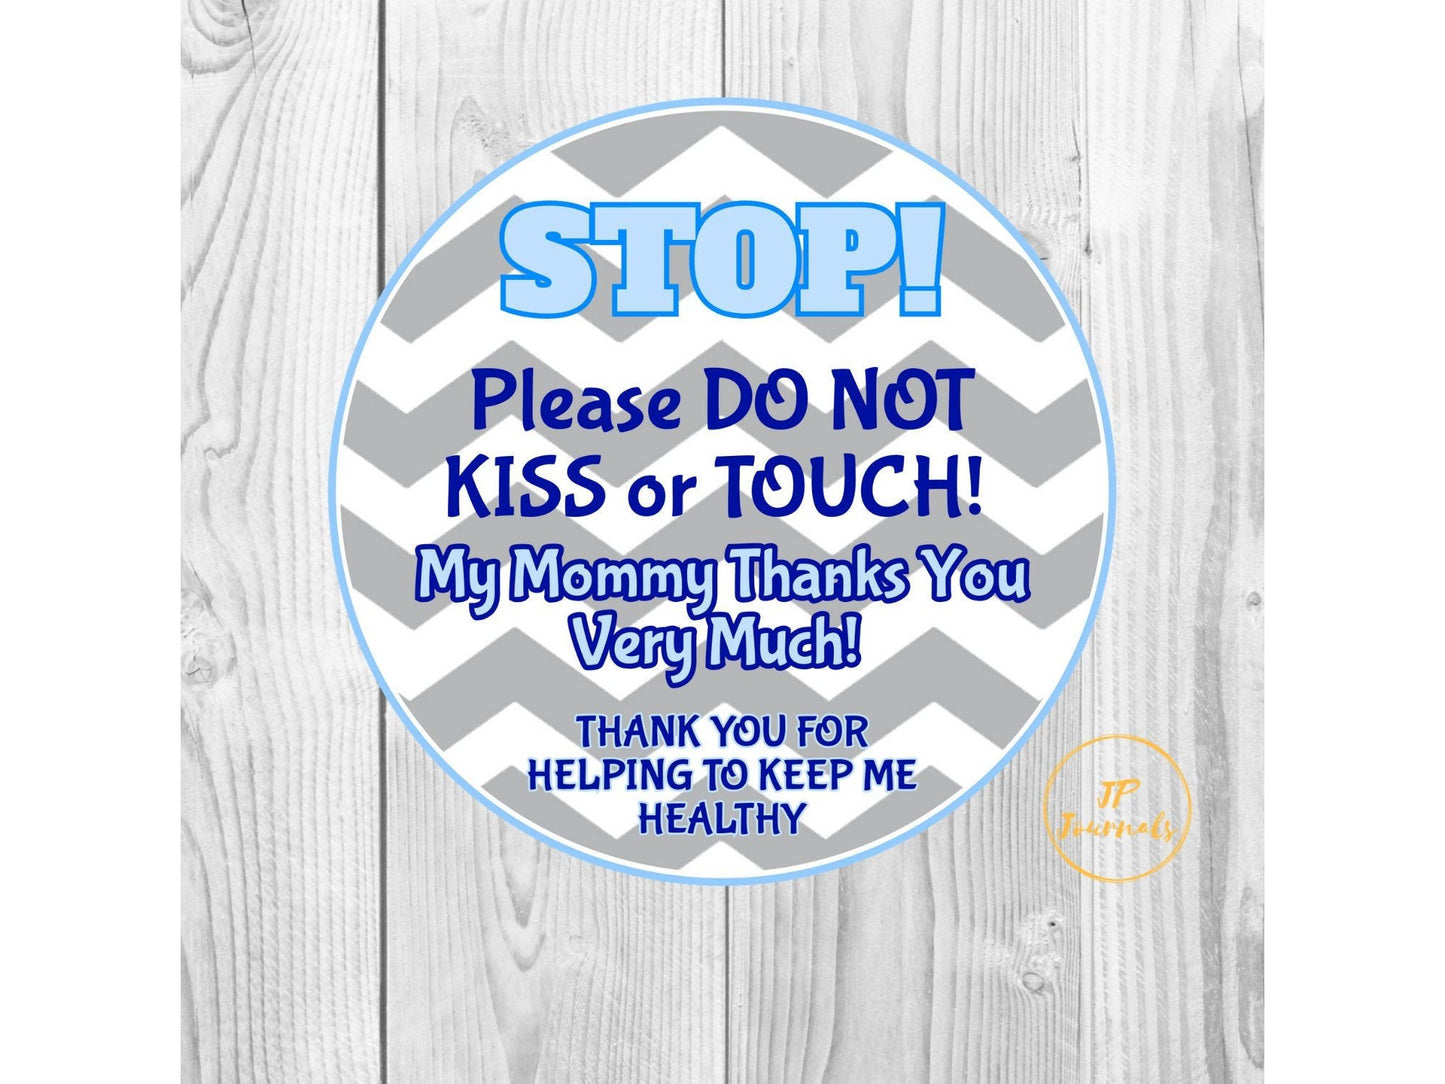 Printable Please Do Not Touch Baby Sign for Infant Boys - Light Blue and Grey Chevron